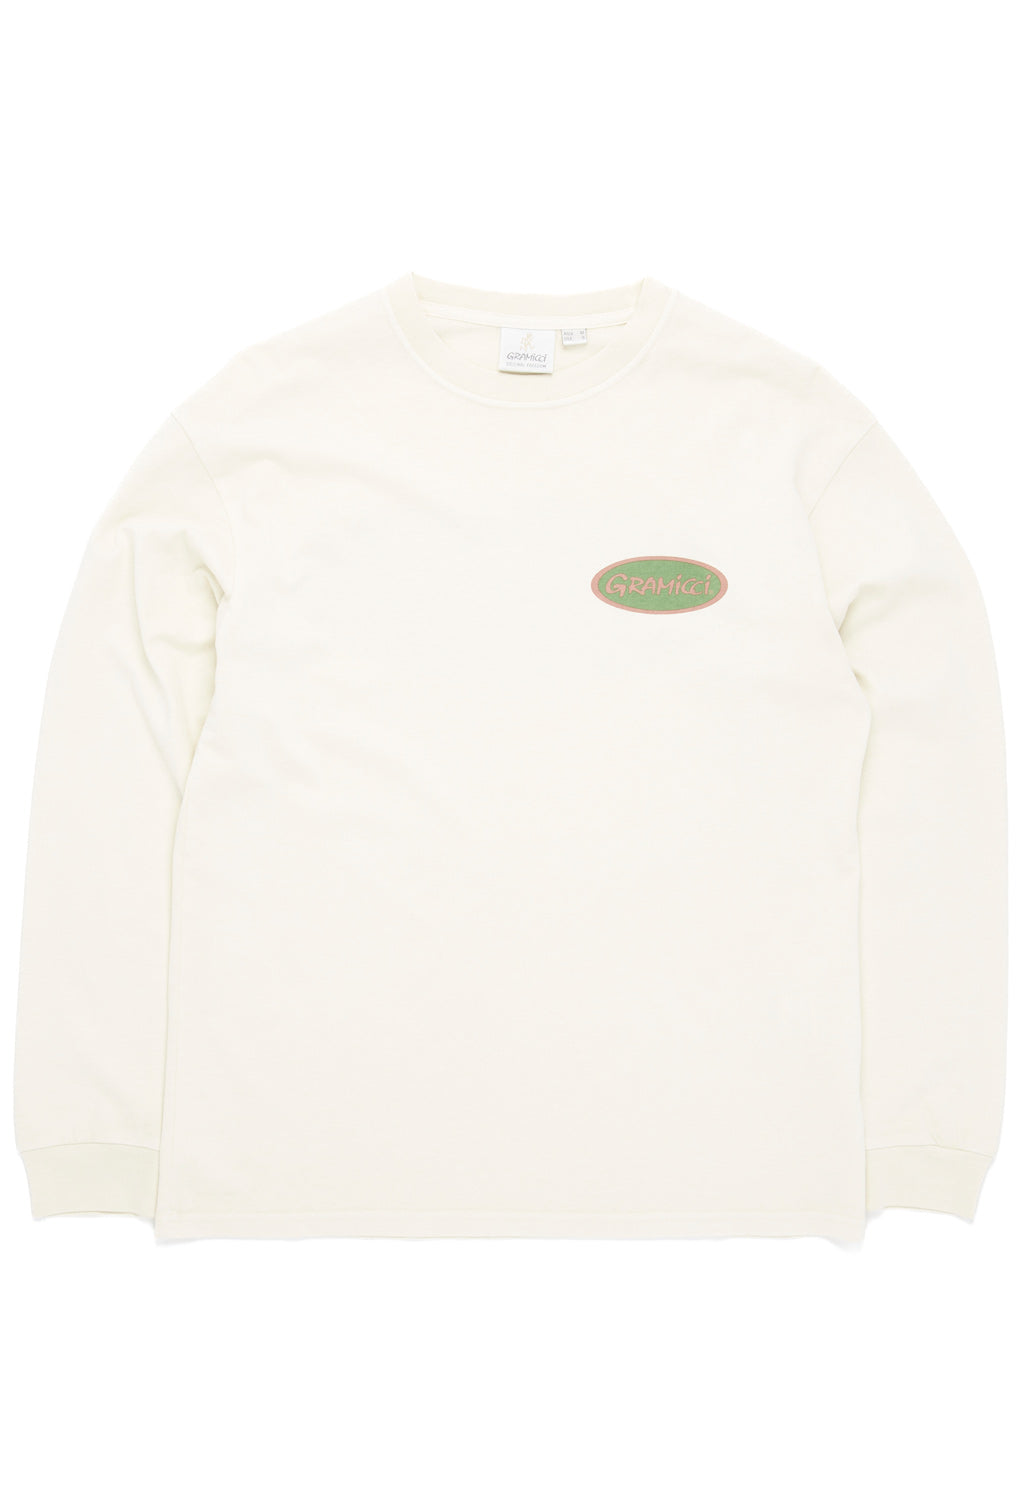 Gramicci Oval Long Sleeved Tee - Sand Pigment